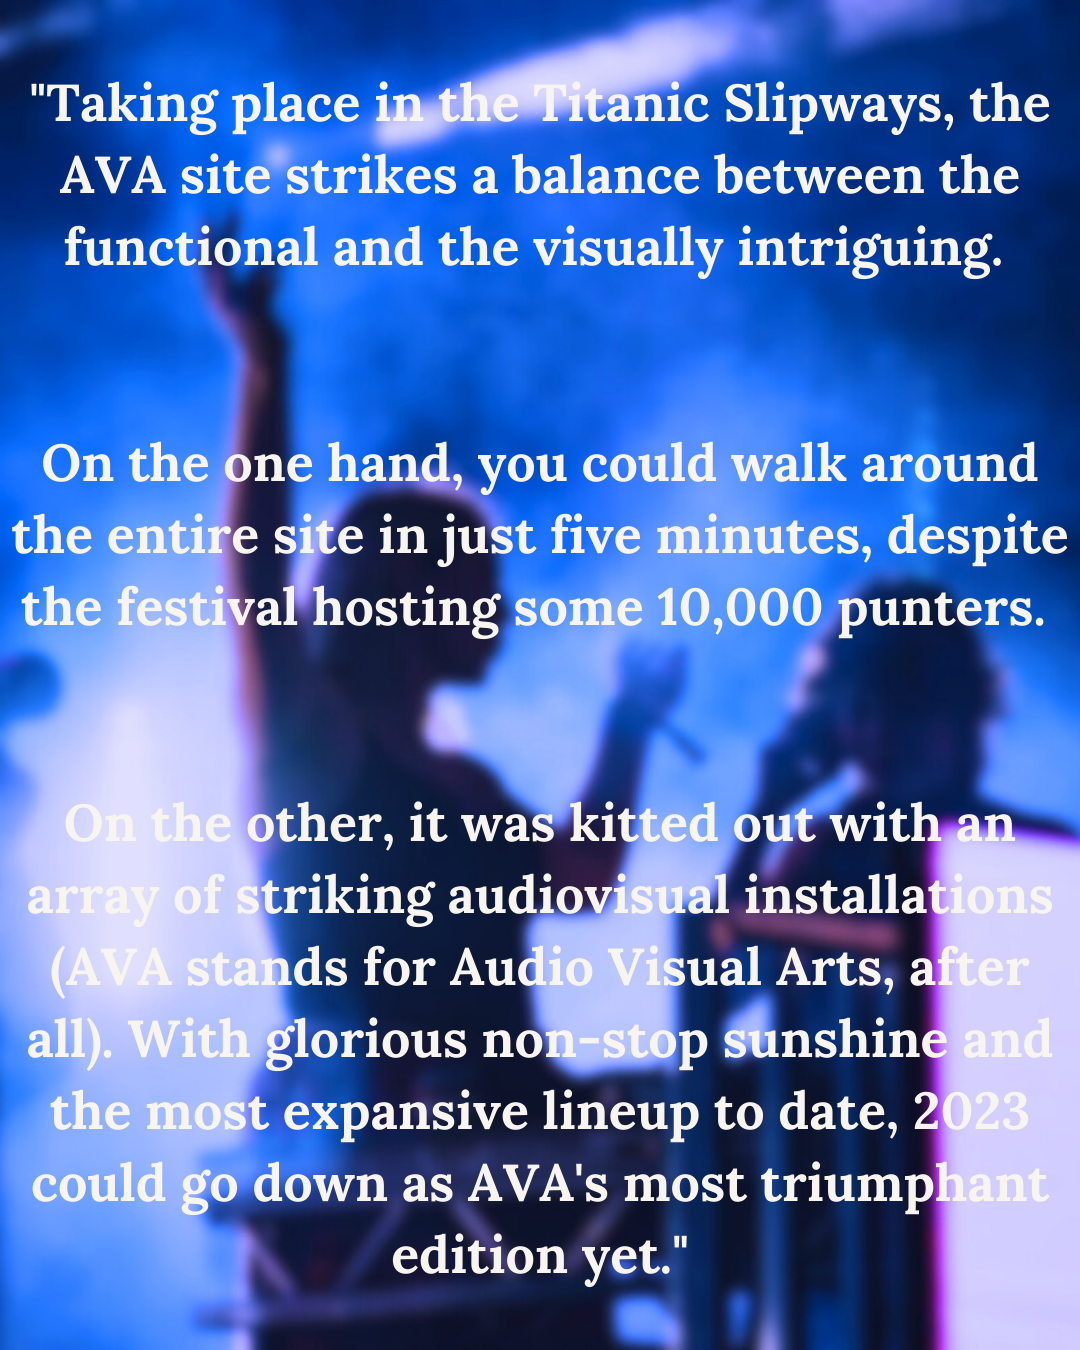 A

"Taking place i ic Slipways, the
AVA site'strikes a balance between the
functional and the visually intriguing.

    

     

On the one hand, you co
th 2 iY] 1 es, despite

a

  

  

ther, it wa
riking audio

 
 
    
 

expansive lineup to date, 2
down as AVA's most triump
edition yet."

__ I